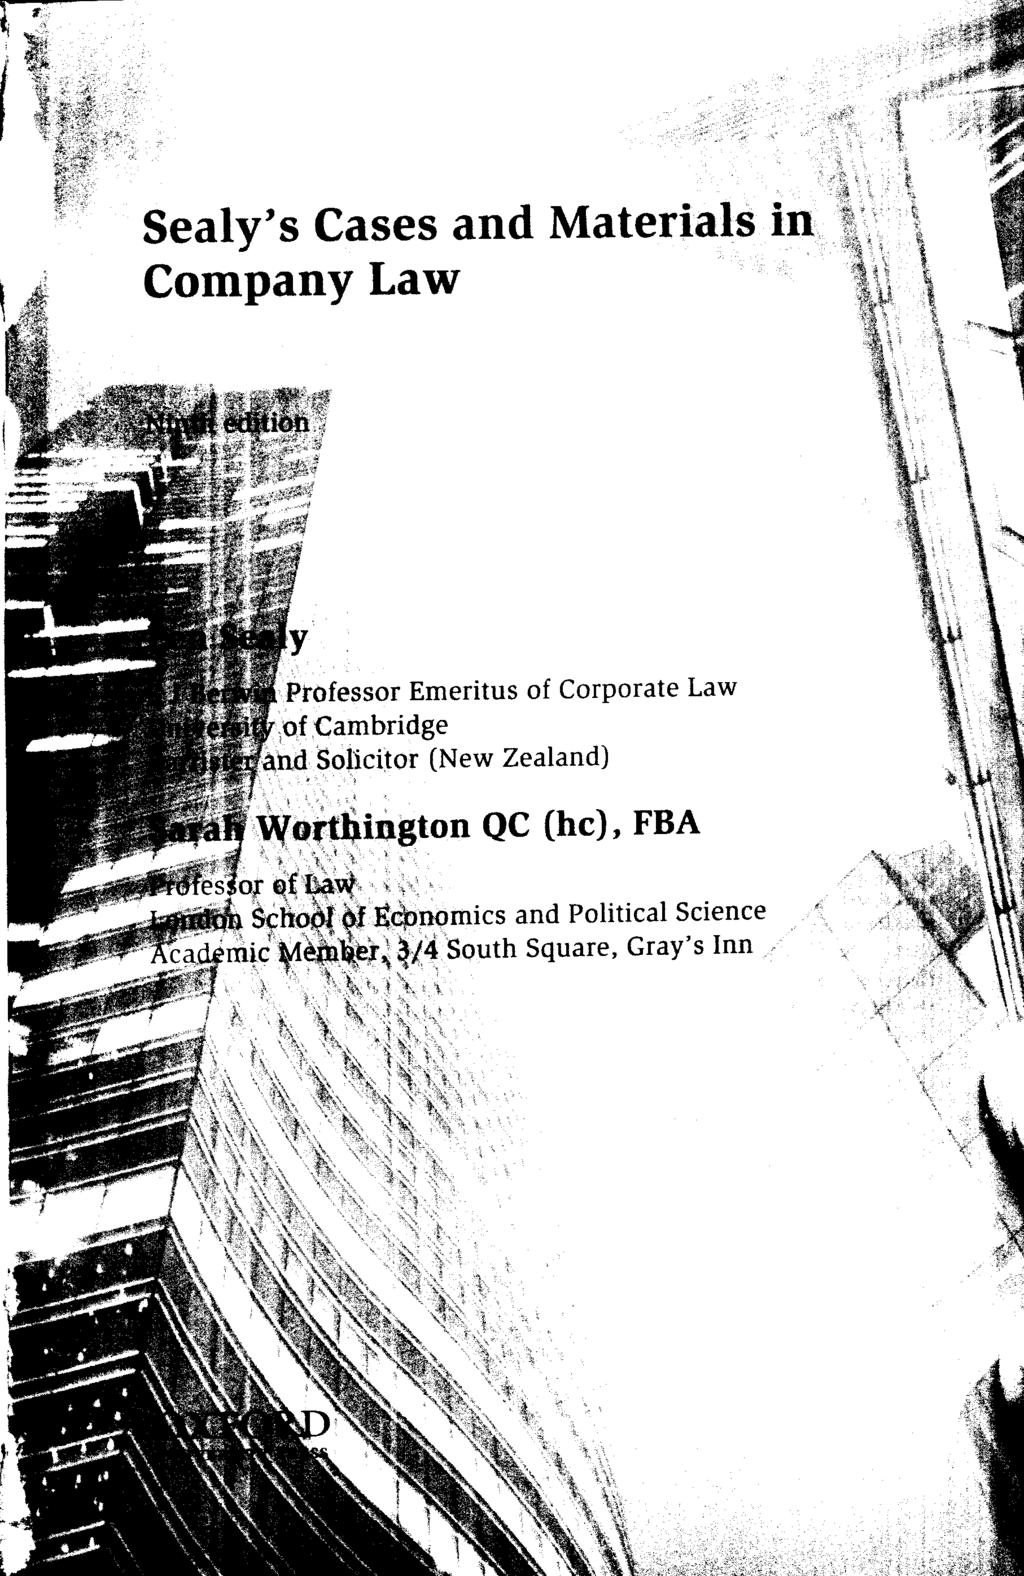 Sealy's Cases and Materials in Company Law Professor Emeritus of Corporate Law of Cambridge and Solicitor (New Zealand)